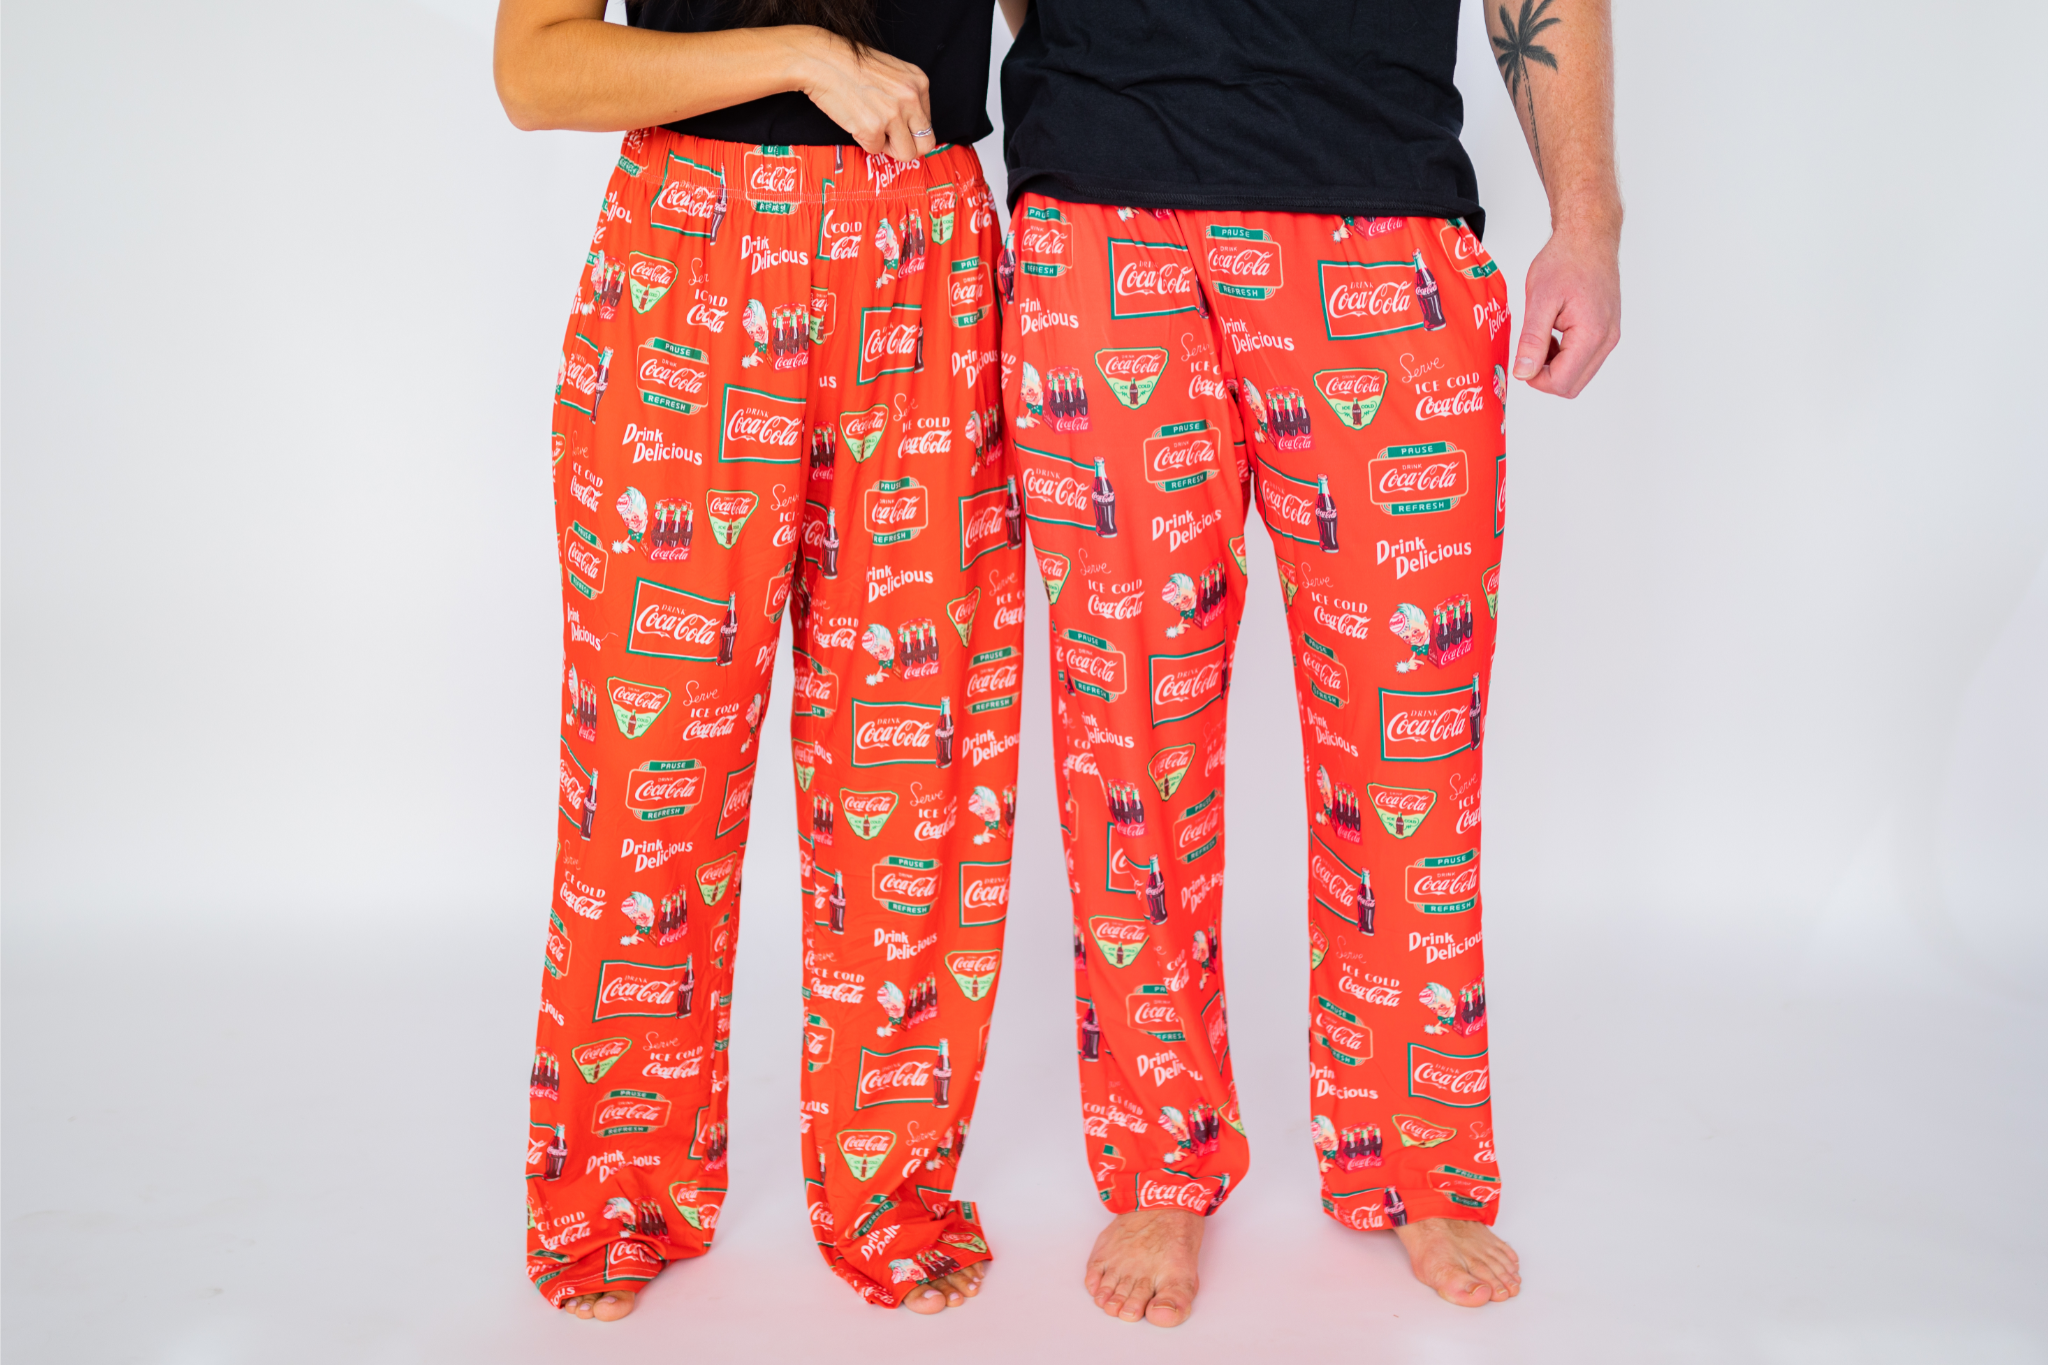 Waist down image of female model and male model standing next to each other (front view) wearing the Coca-Cola Retro Pattern pajama lounge pants